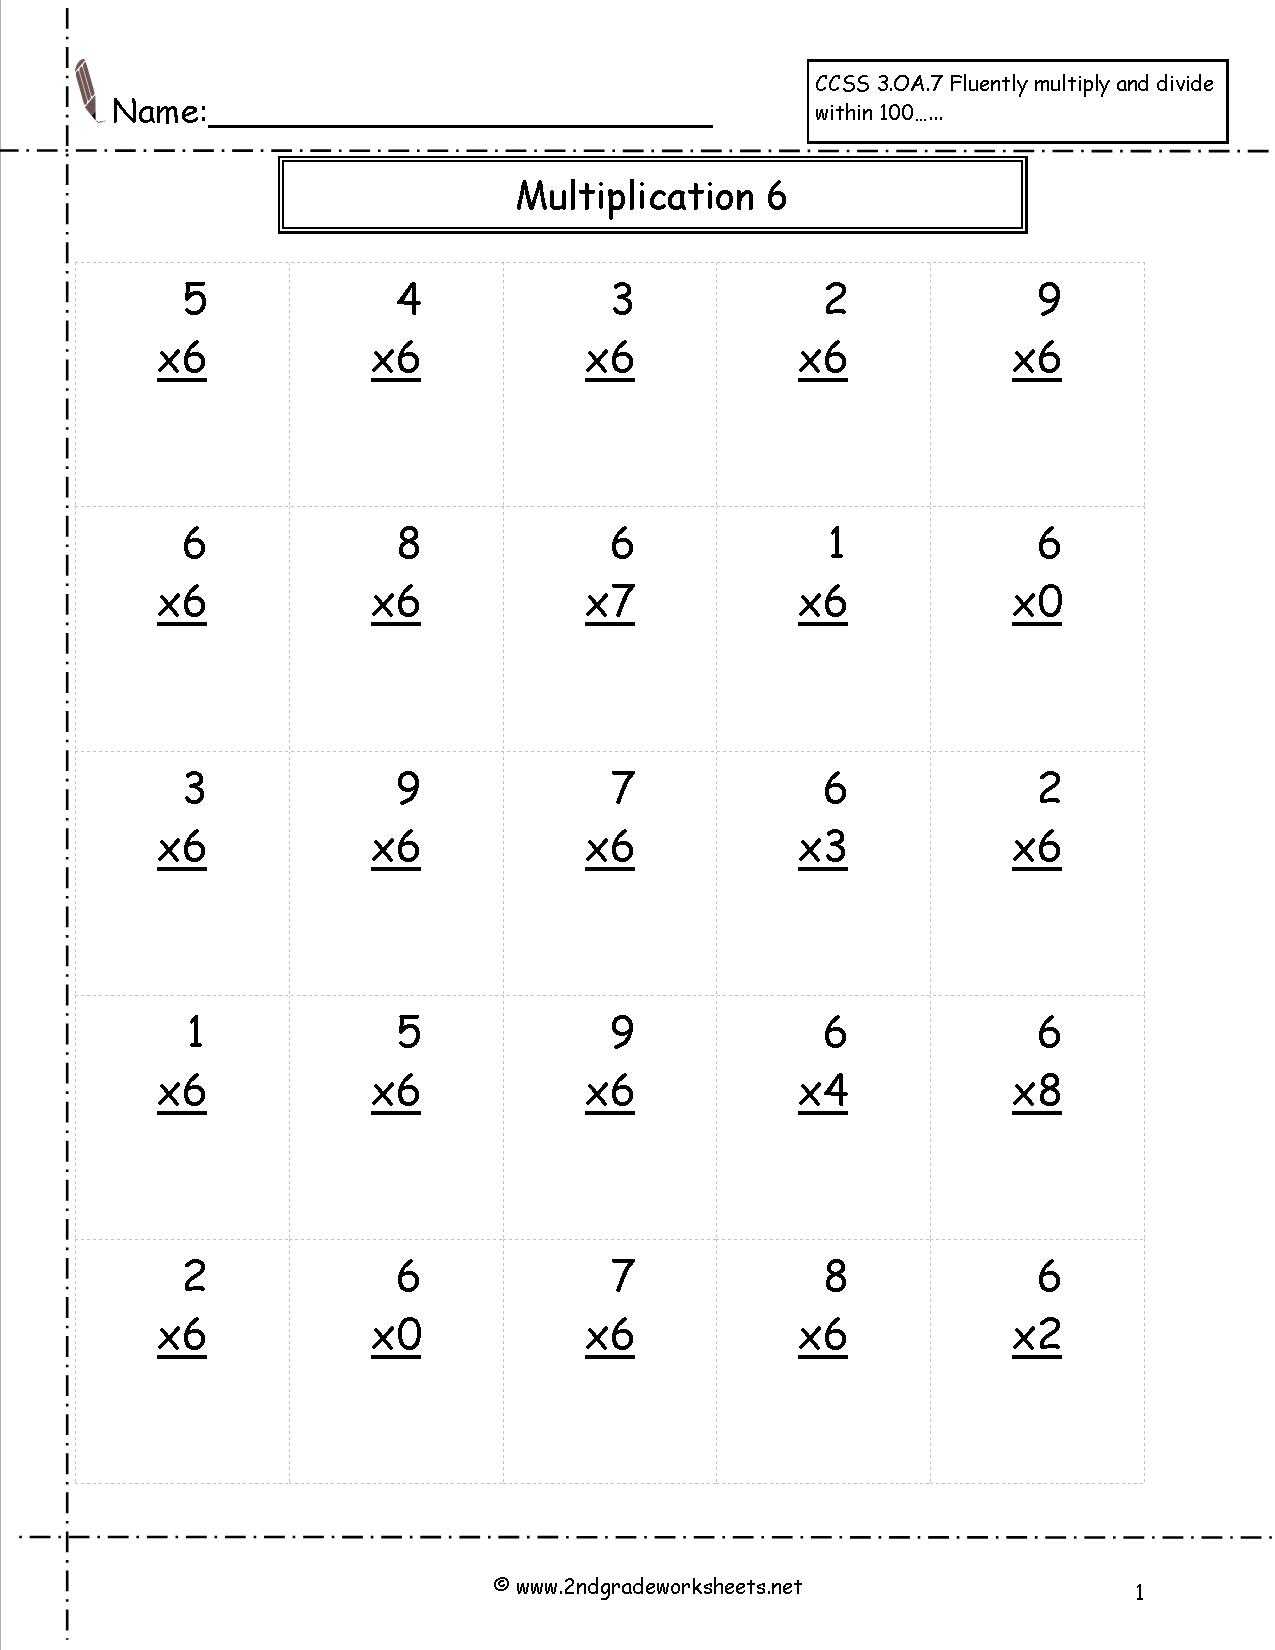 Math Facts Practice Worksheets Multiplication together with Printable Multiplication Worksheets by 3 the Best Worksheets Image